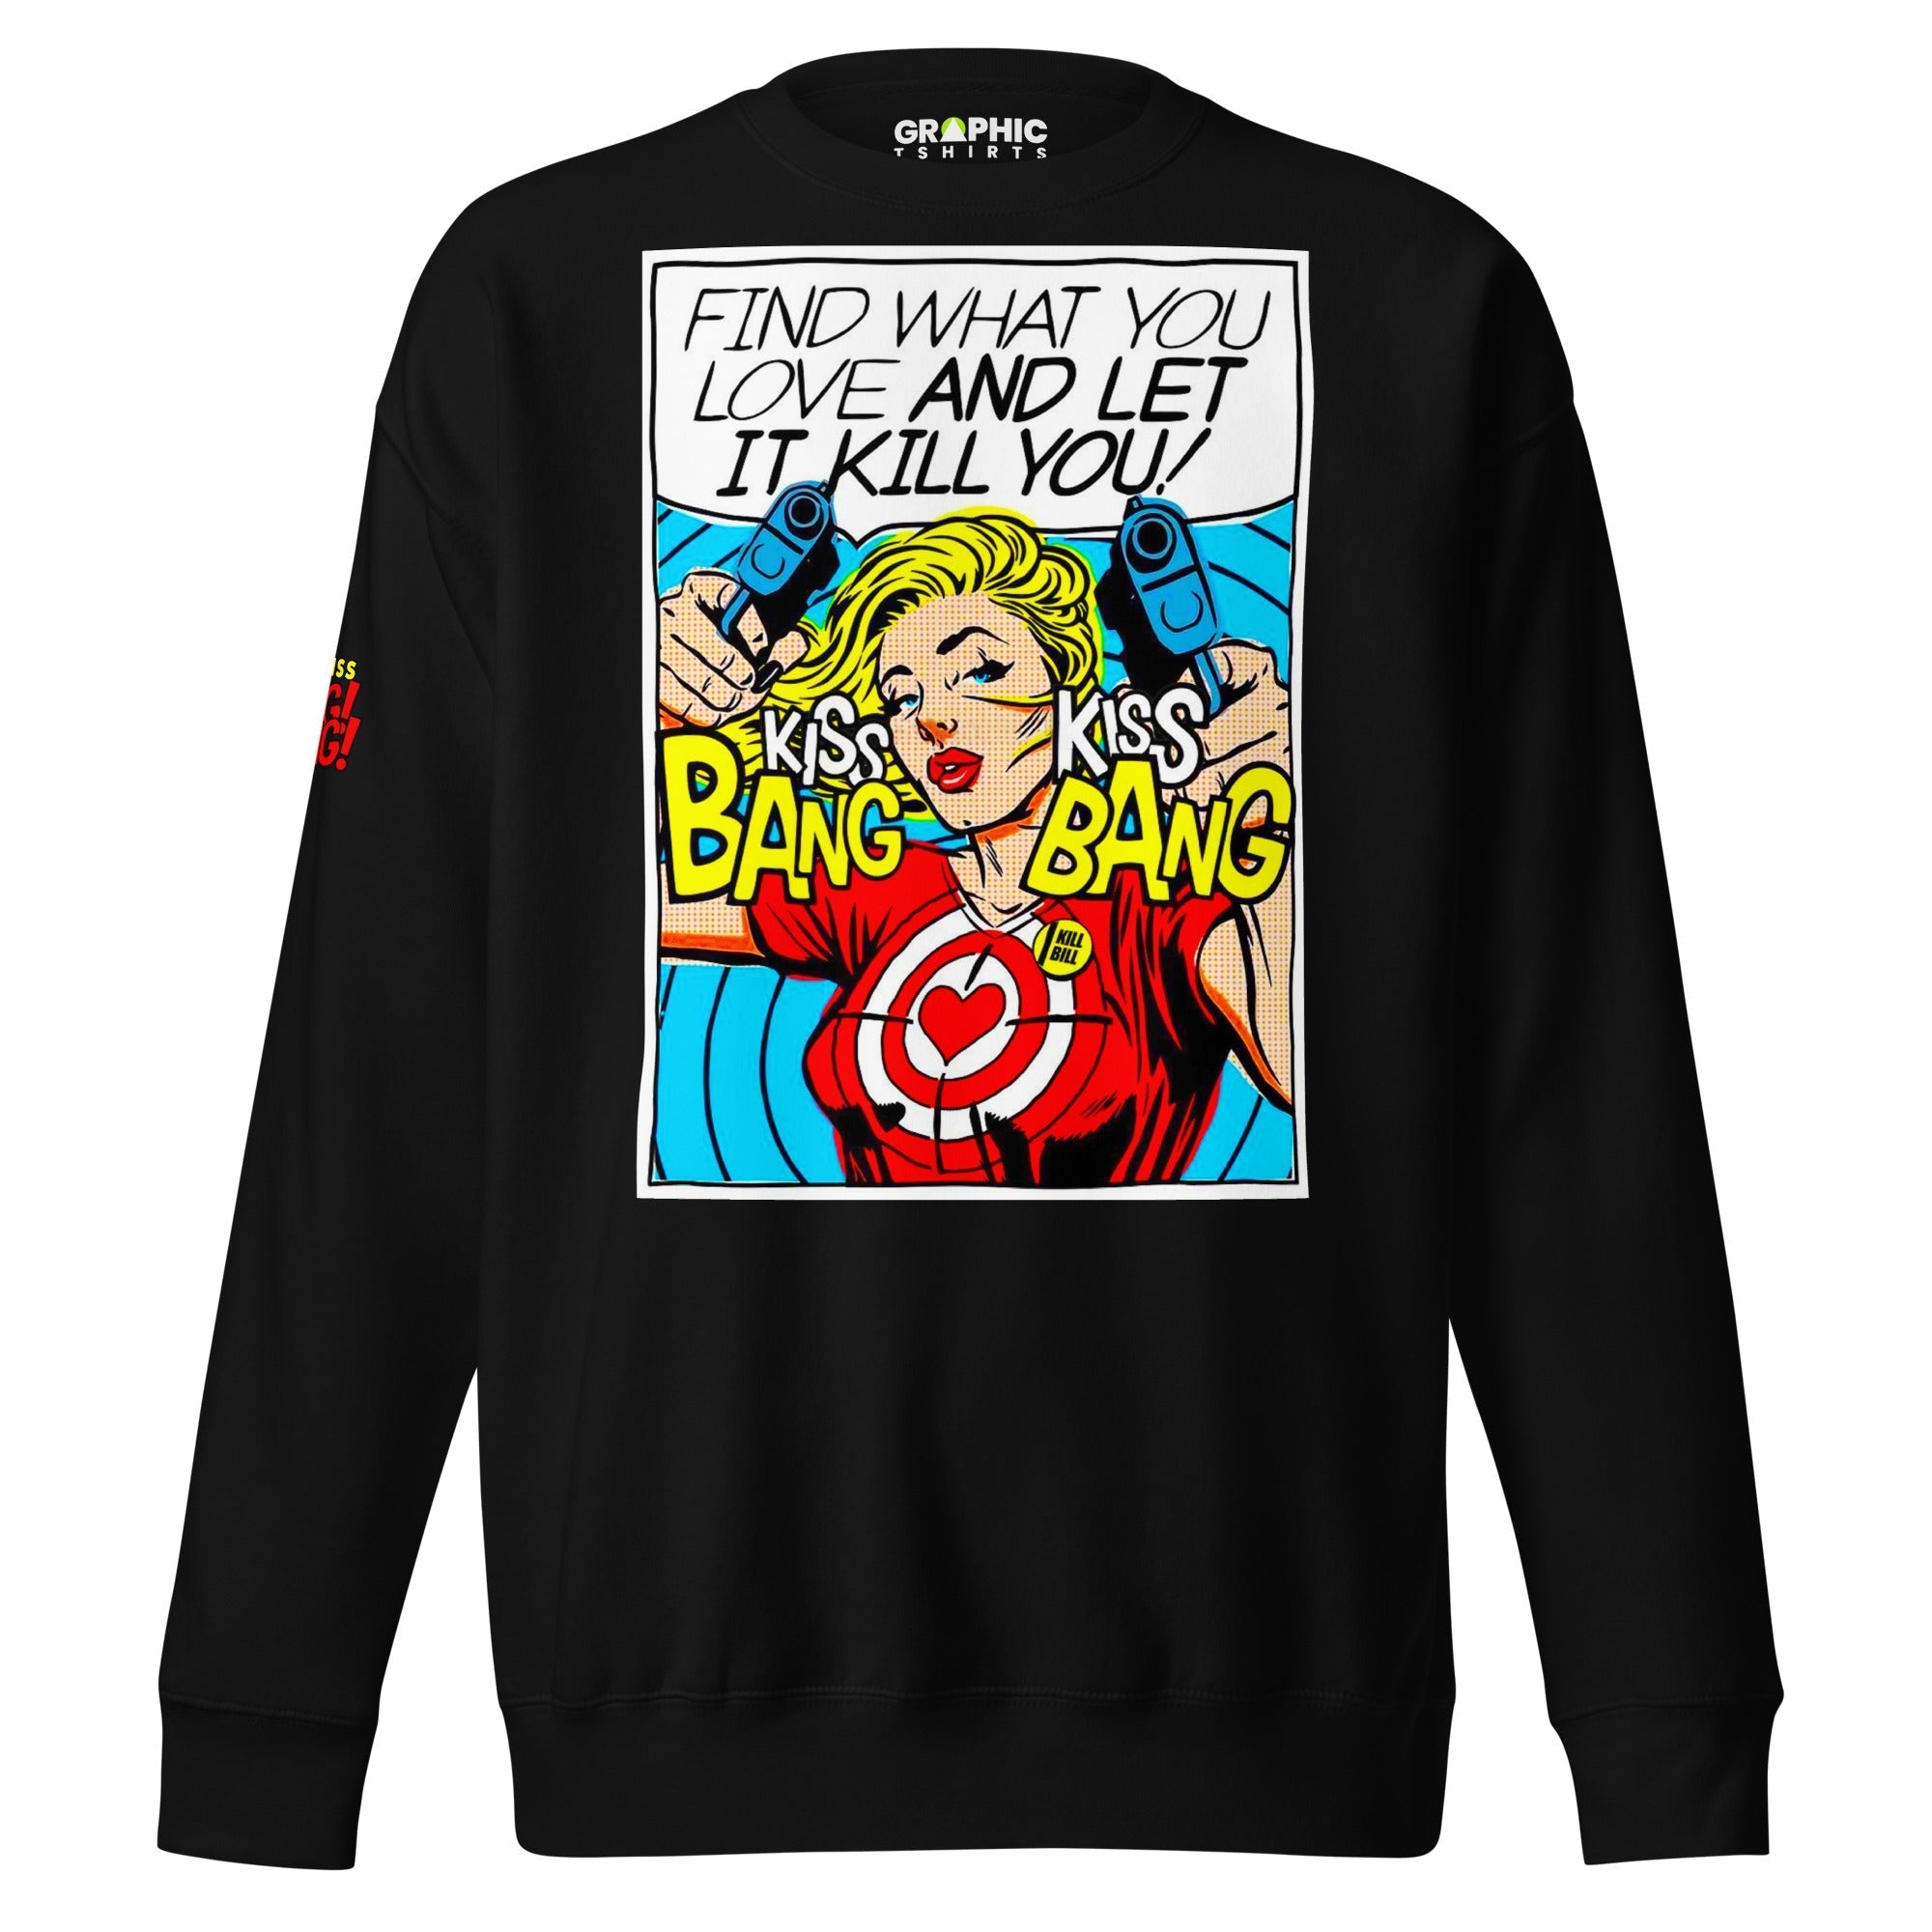 Unisex Premium Sweatshirt - Find What You Love And Let It Kill You! Kiss! Kiss! Bang! Bang! - GRAPHIC T-SHIRTS